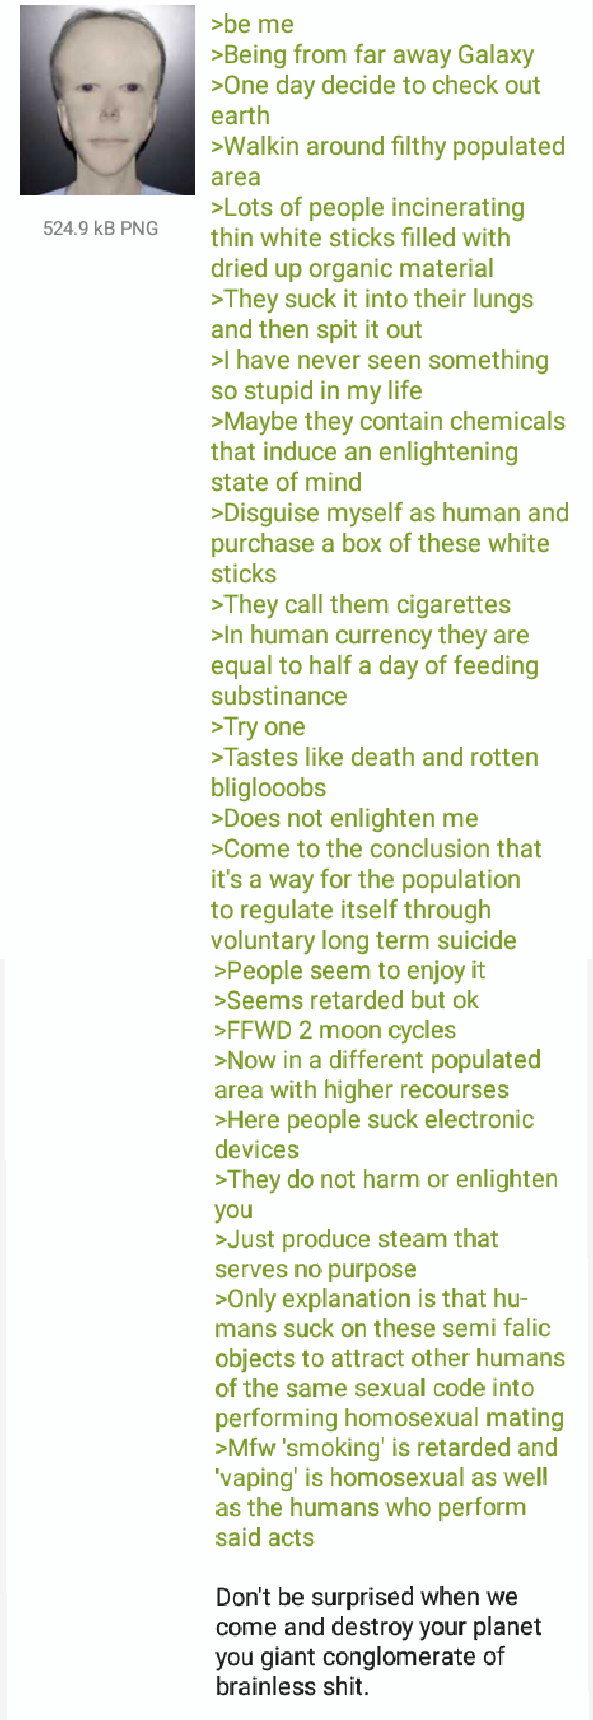 Anon is from outer space